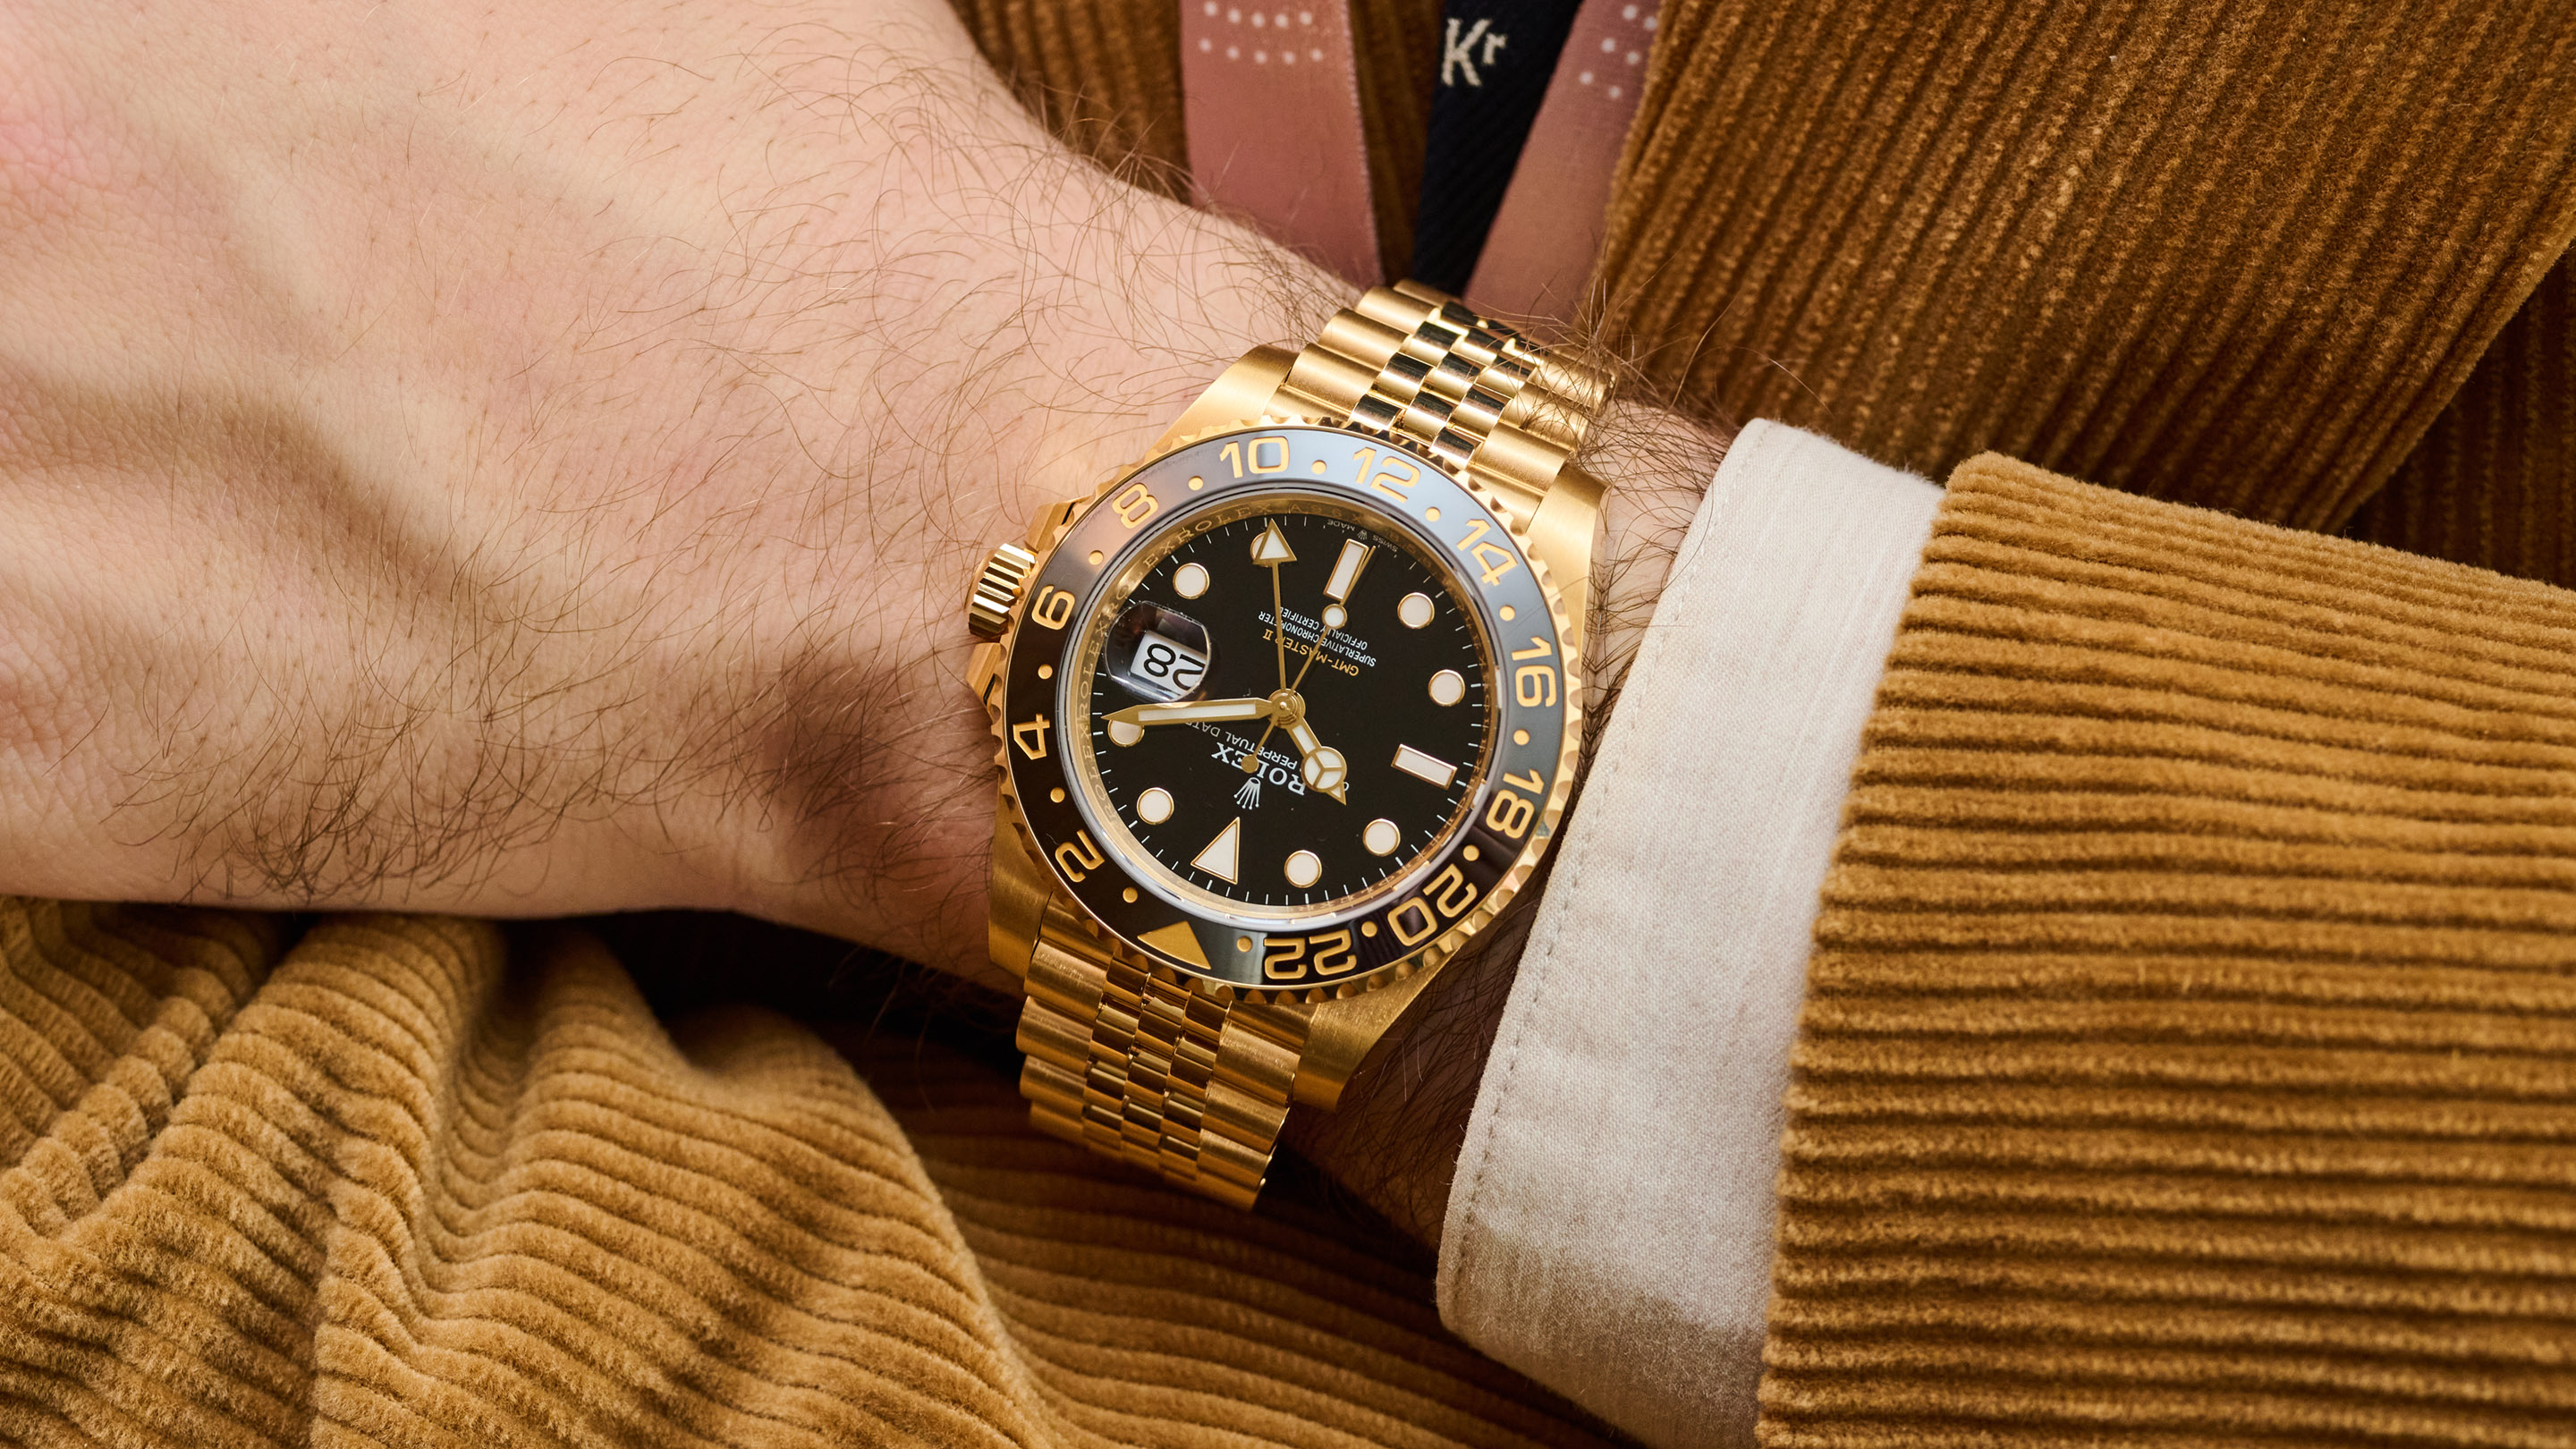 A Solid Gold Rolex Is Never The Wrong Choice, And This Newest Jubilee  Bracelet-Laden Gmt Is Very Choice